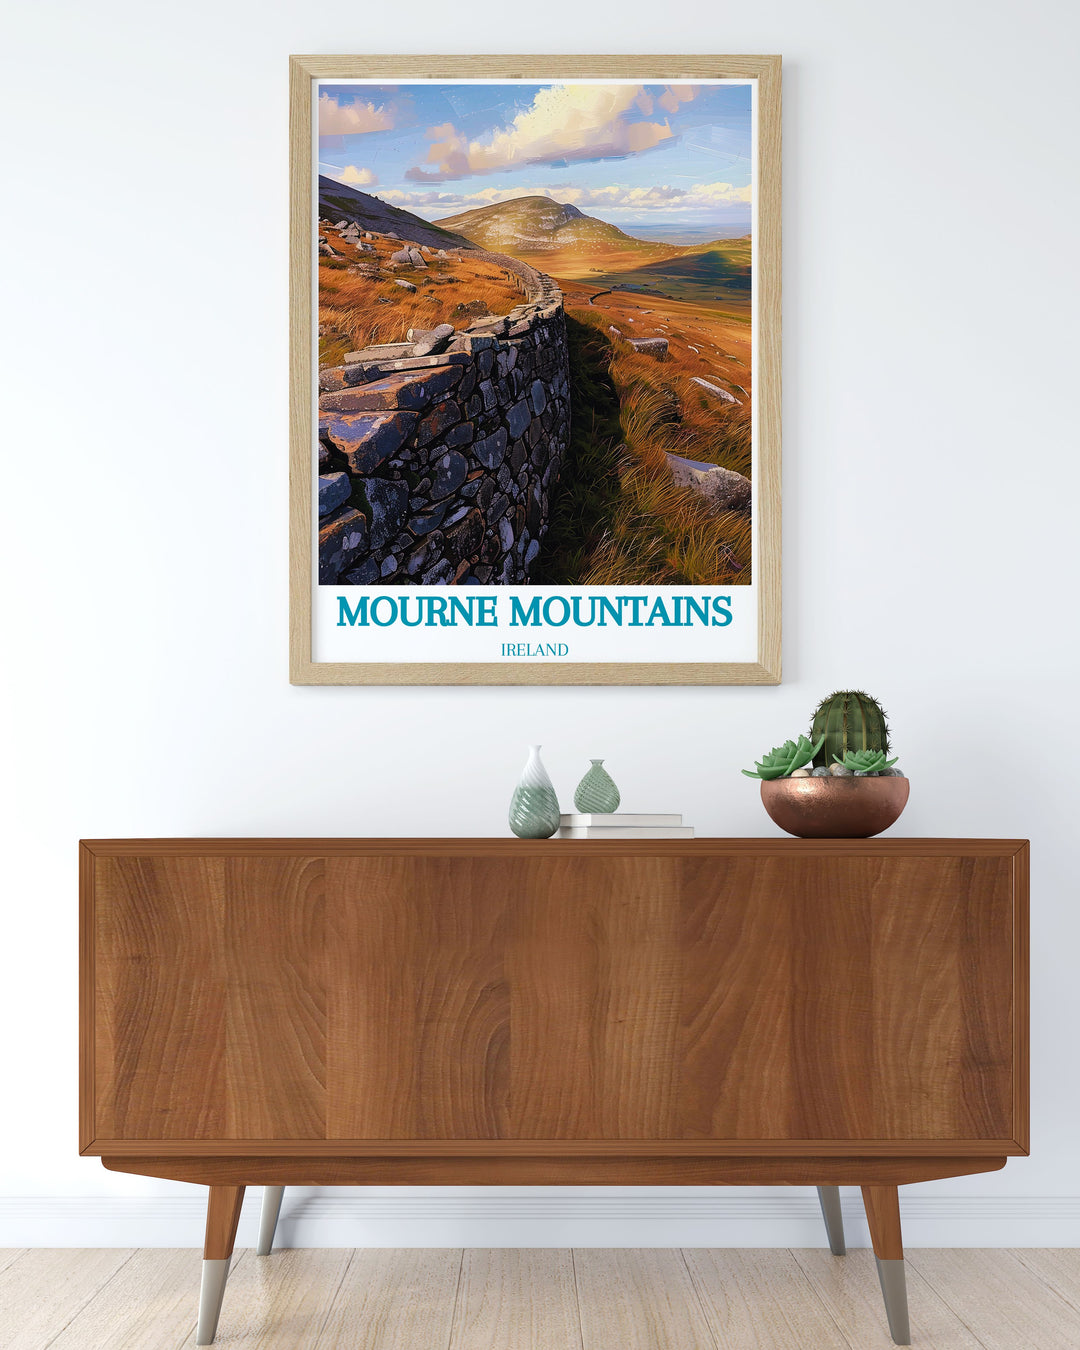 This travel poster beautifully depicts the dynamic landscapes and historical charm of the Mourne Mountains, ideal for adding a touch of scenic beauty and cultural heritage to any room.